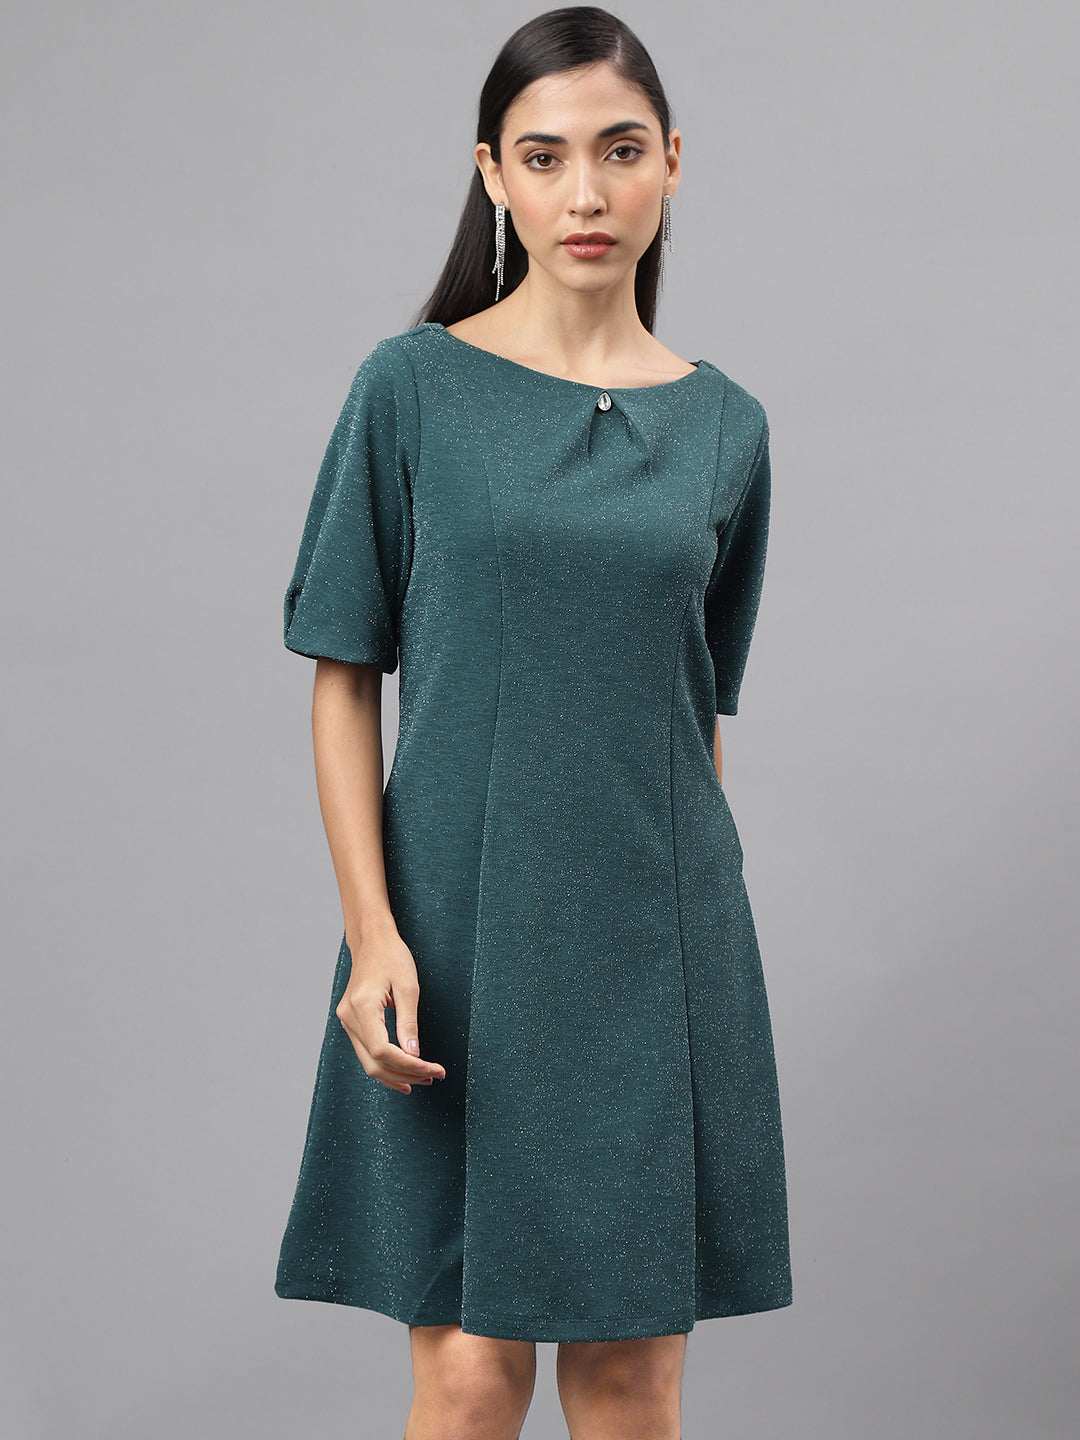 Green Half Sleeve Round Neck Solid A-Line Dress